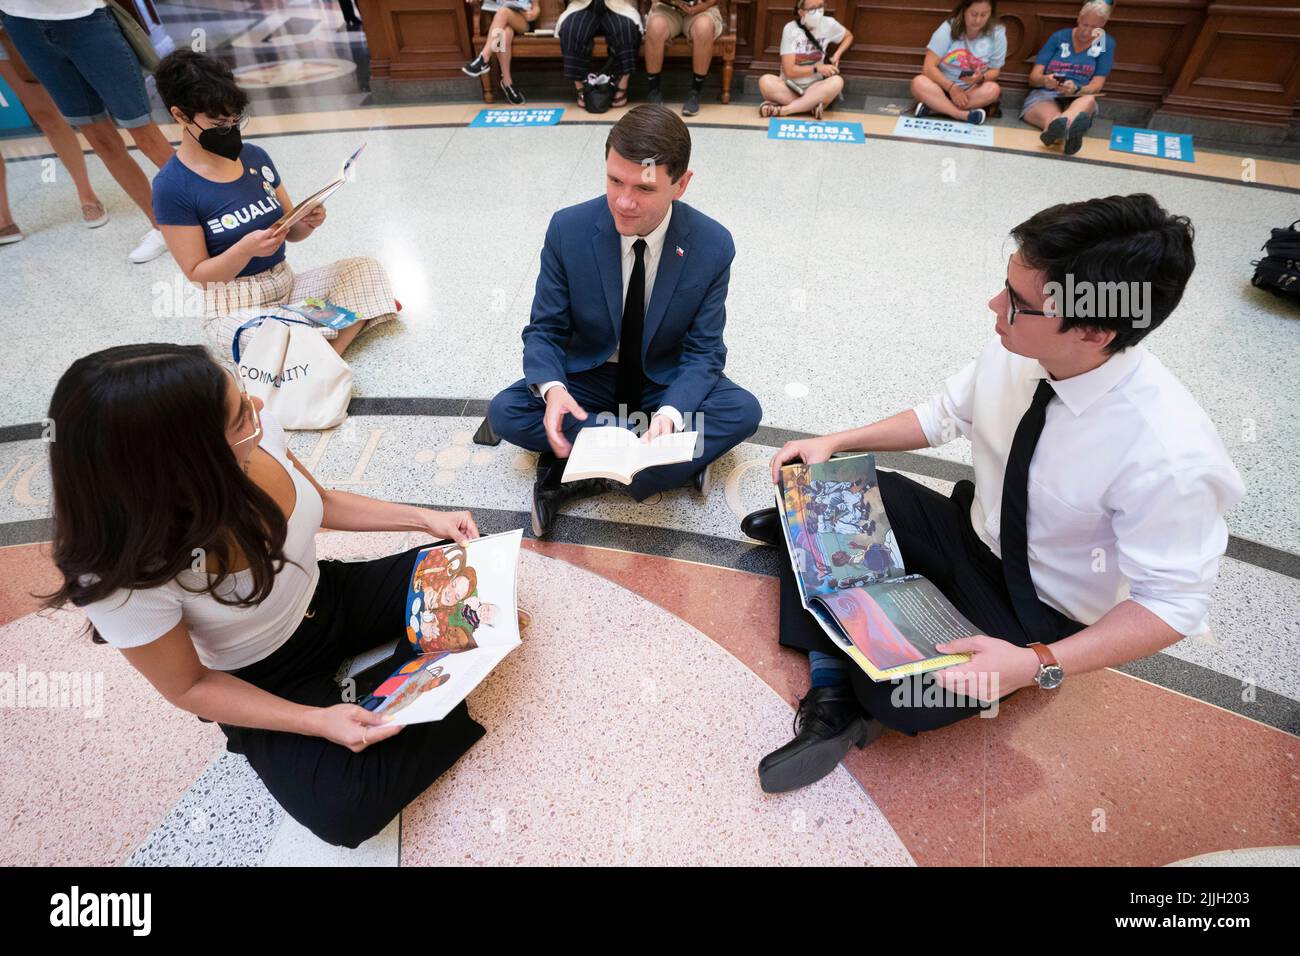 Austin Texas USA, July 26, 2022: State Rep. JAMES TALARICO (c) joins BRIANNA MENARD, l, and ANTONIO ESPARZA, r, and other activists protesting book censorship in public school classrooms and libraries. Protesters sat in the Capitol rotunda and read some of the 850 books listed on a Republican lawmaker's list of 'uncomfortable' titles. Credit: Bob Daemmrich/Alamy Live News Stock Photo